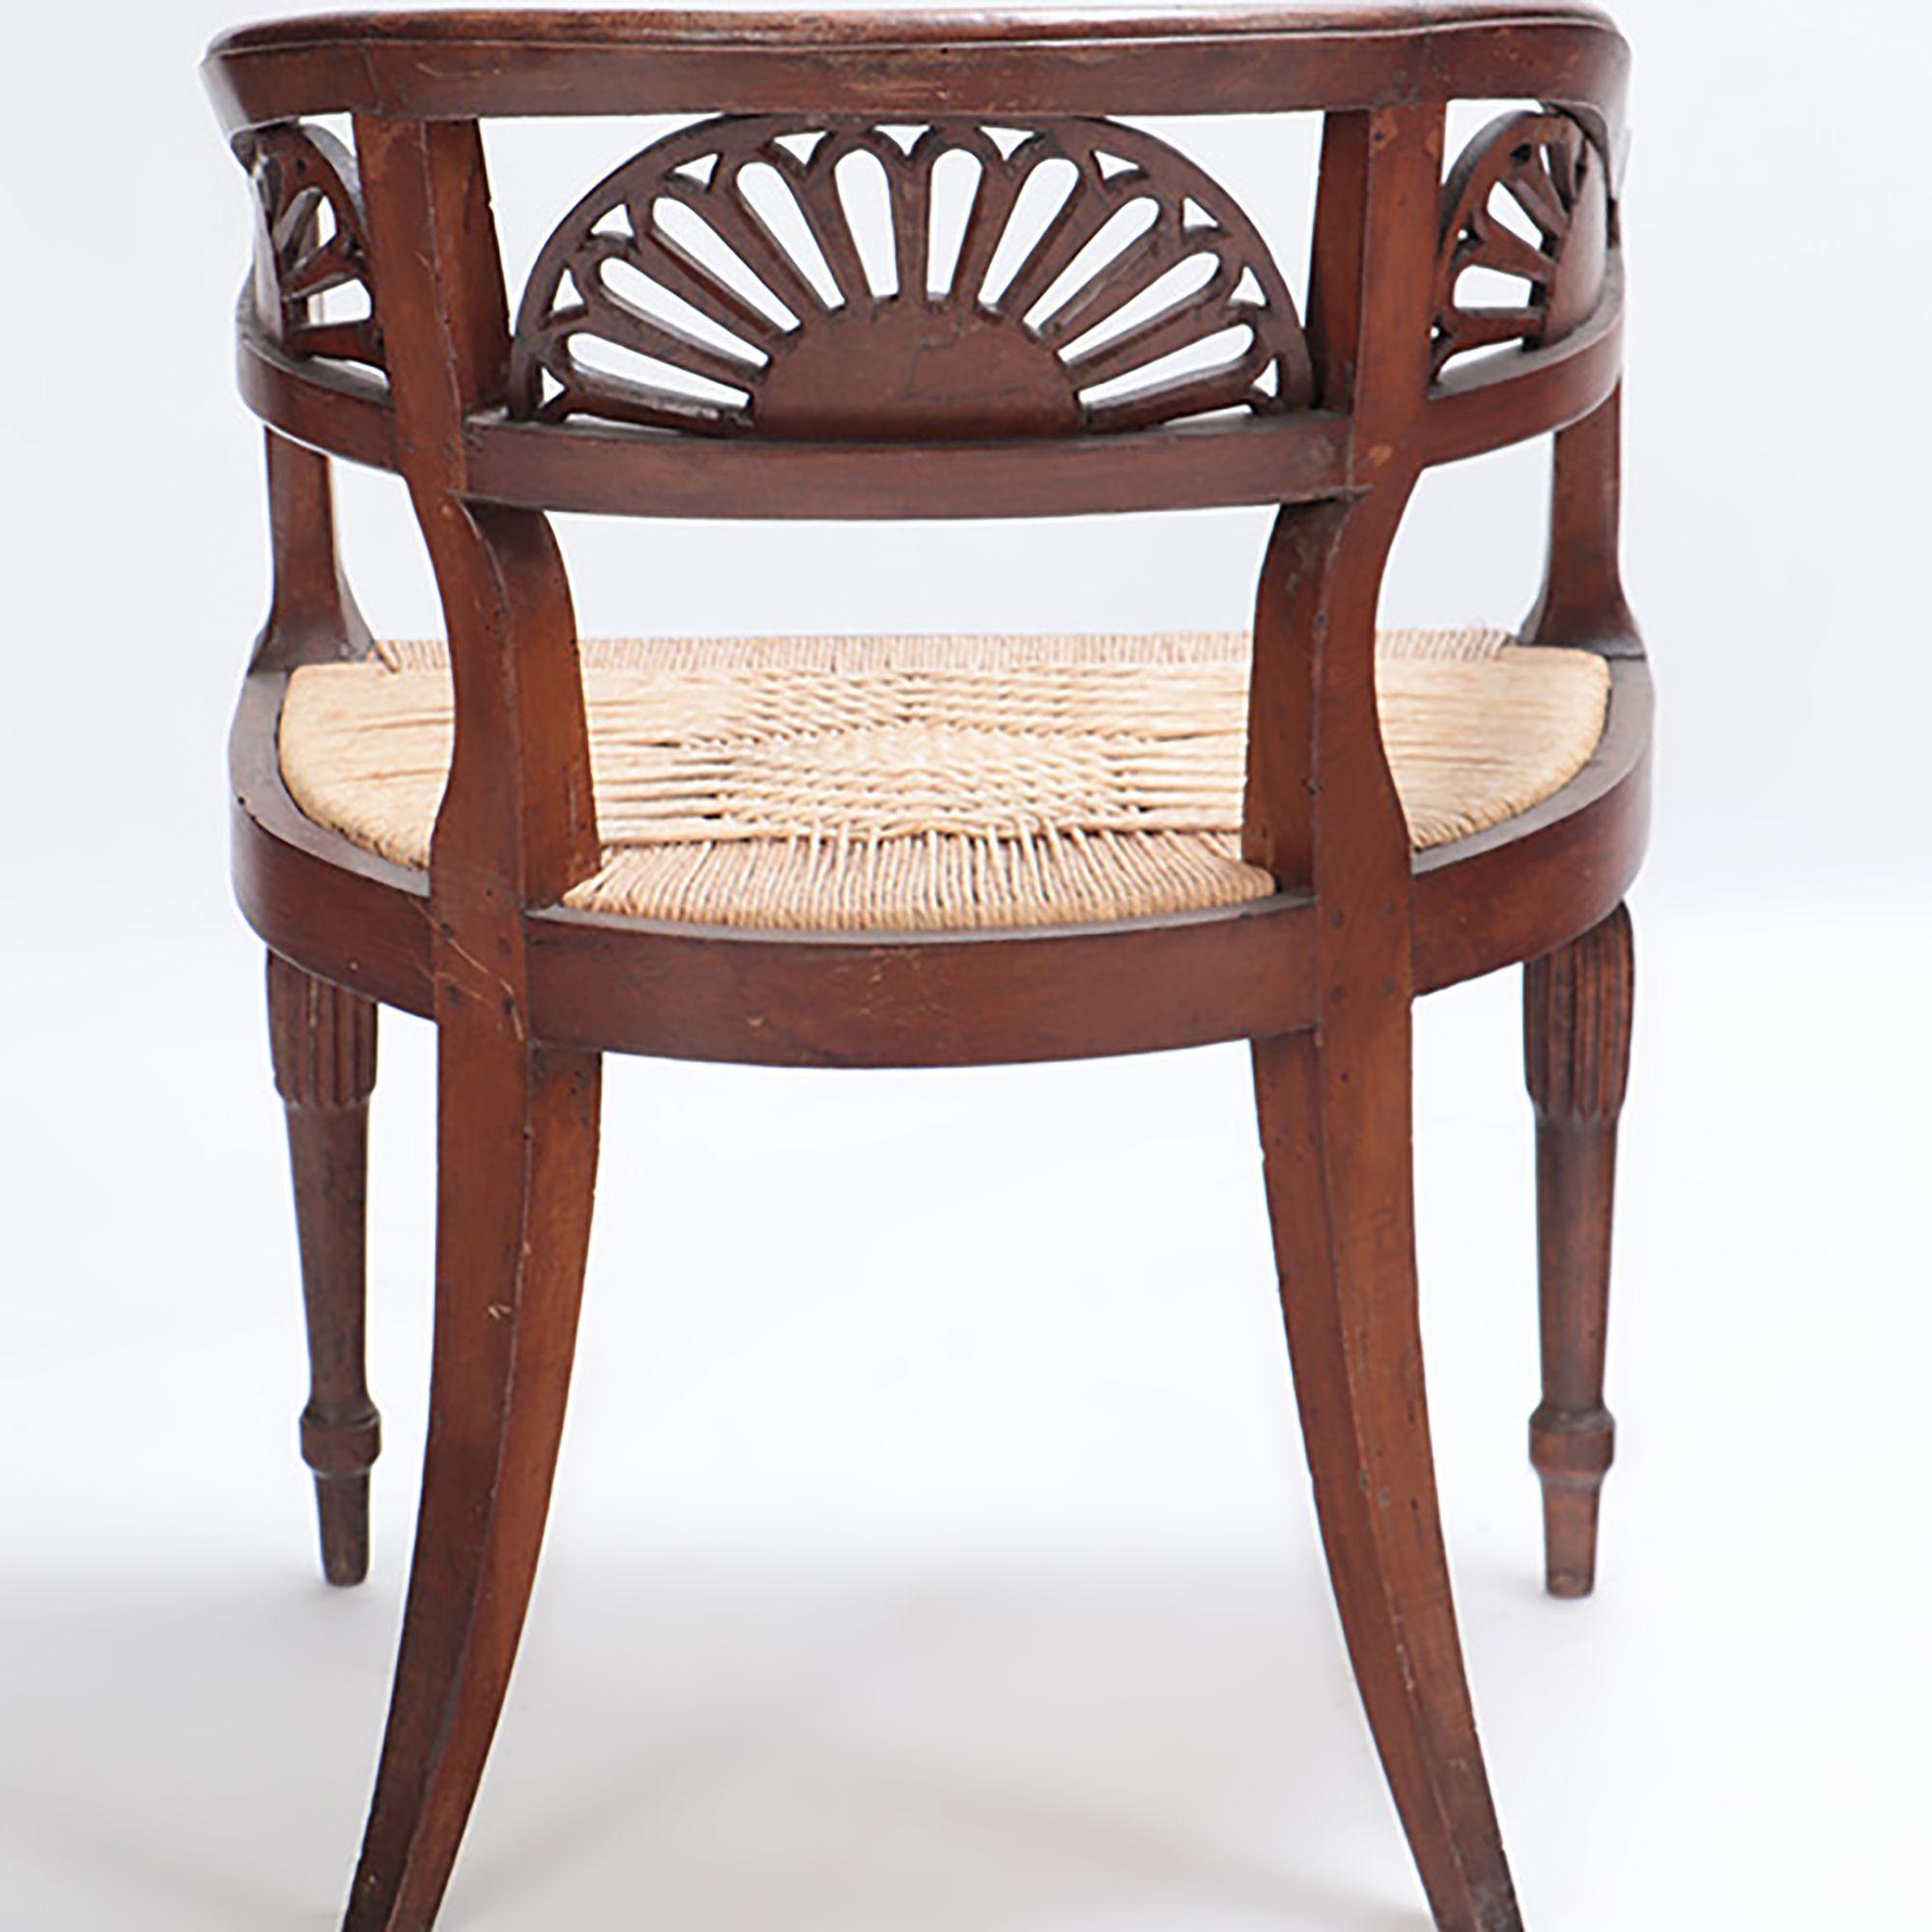 Pair of Italian Walnut Open Arm Chairs with Cord Seats, circa 1800 For Sale 2